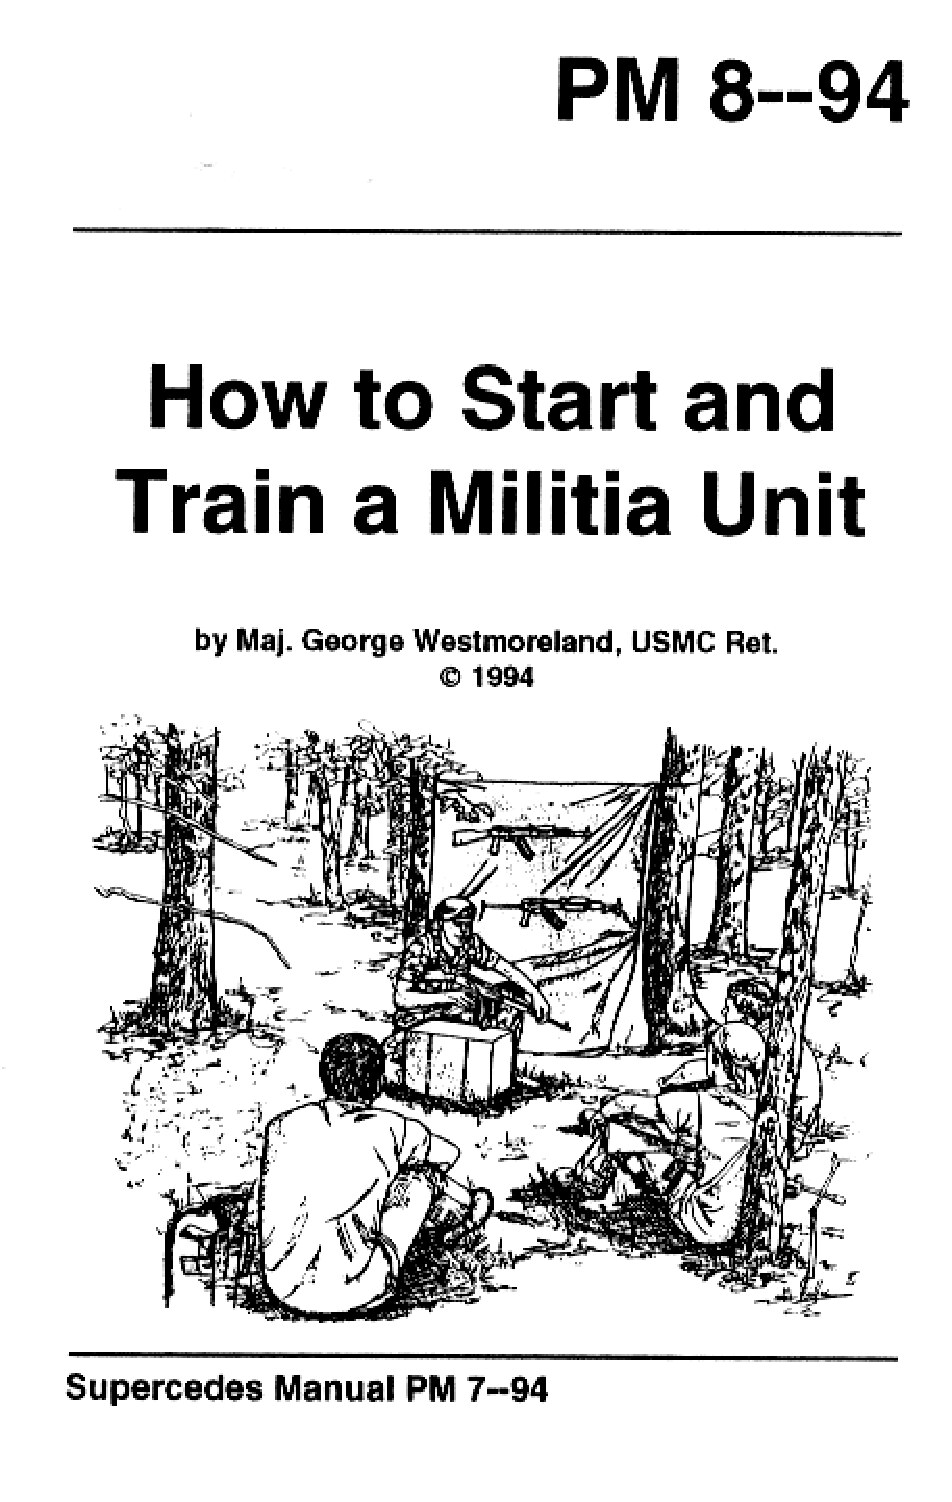 How to Start and Train A Militia Unit